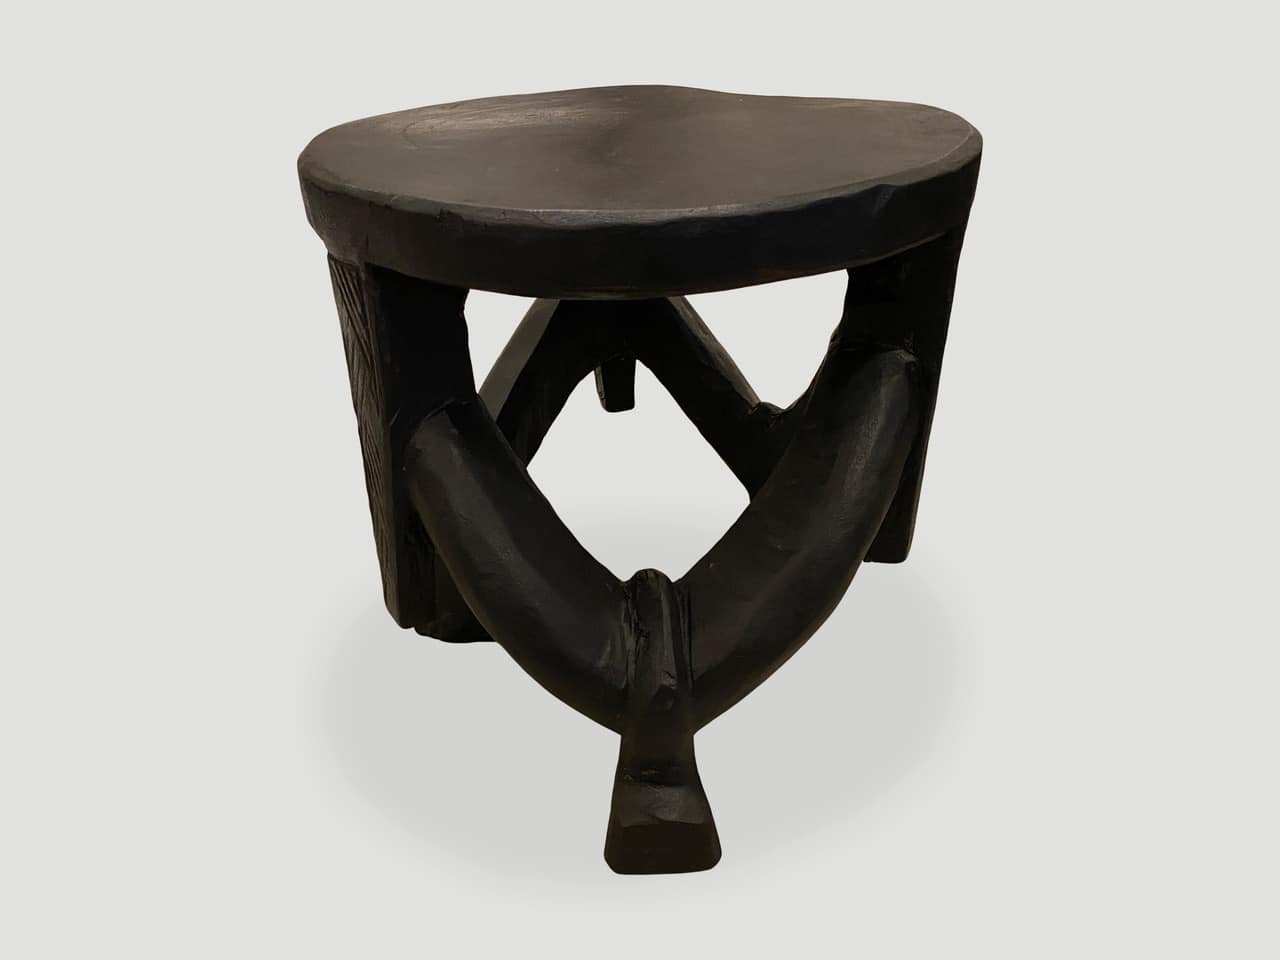 Tanzanian antique sculptural side table or stool.